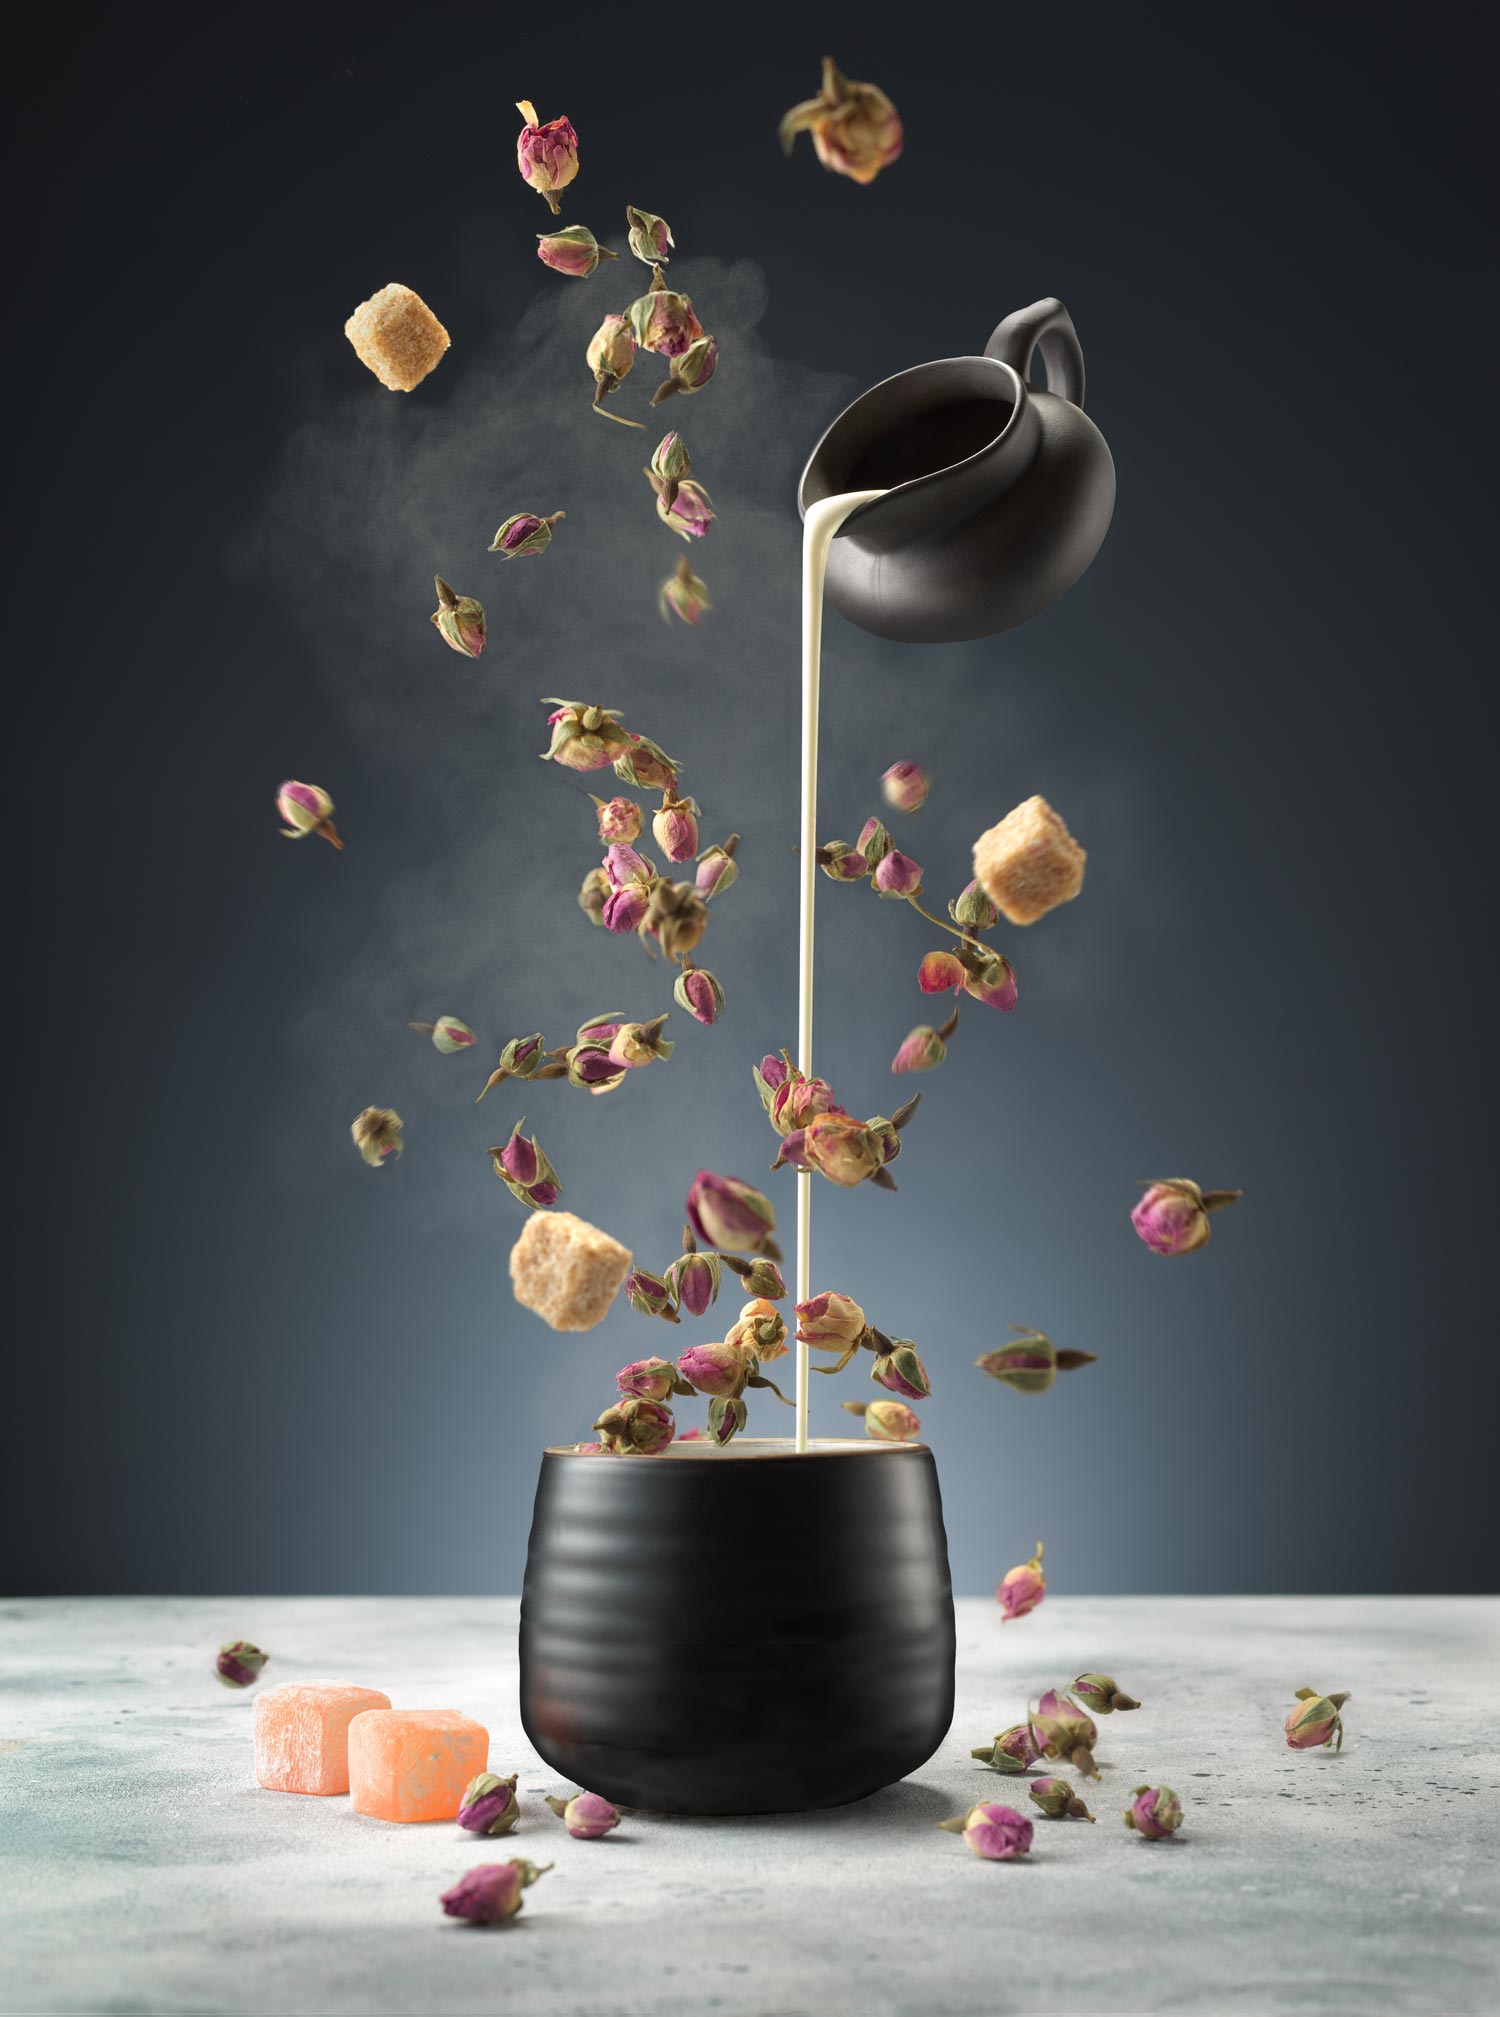 An image of a cup with elements needed to make a flower tea exploding out of the cup 